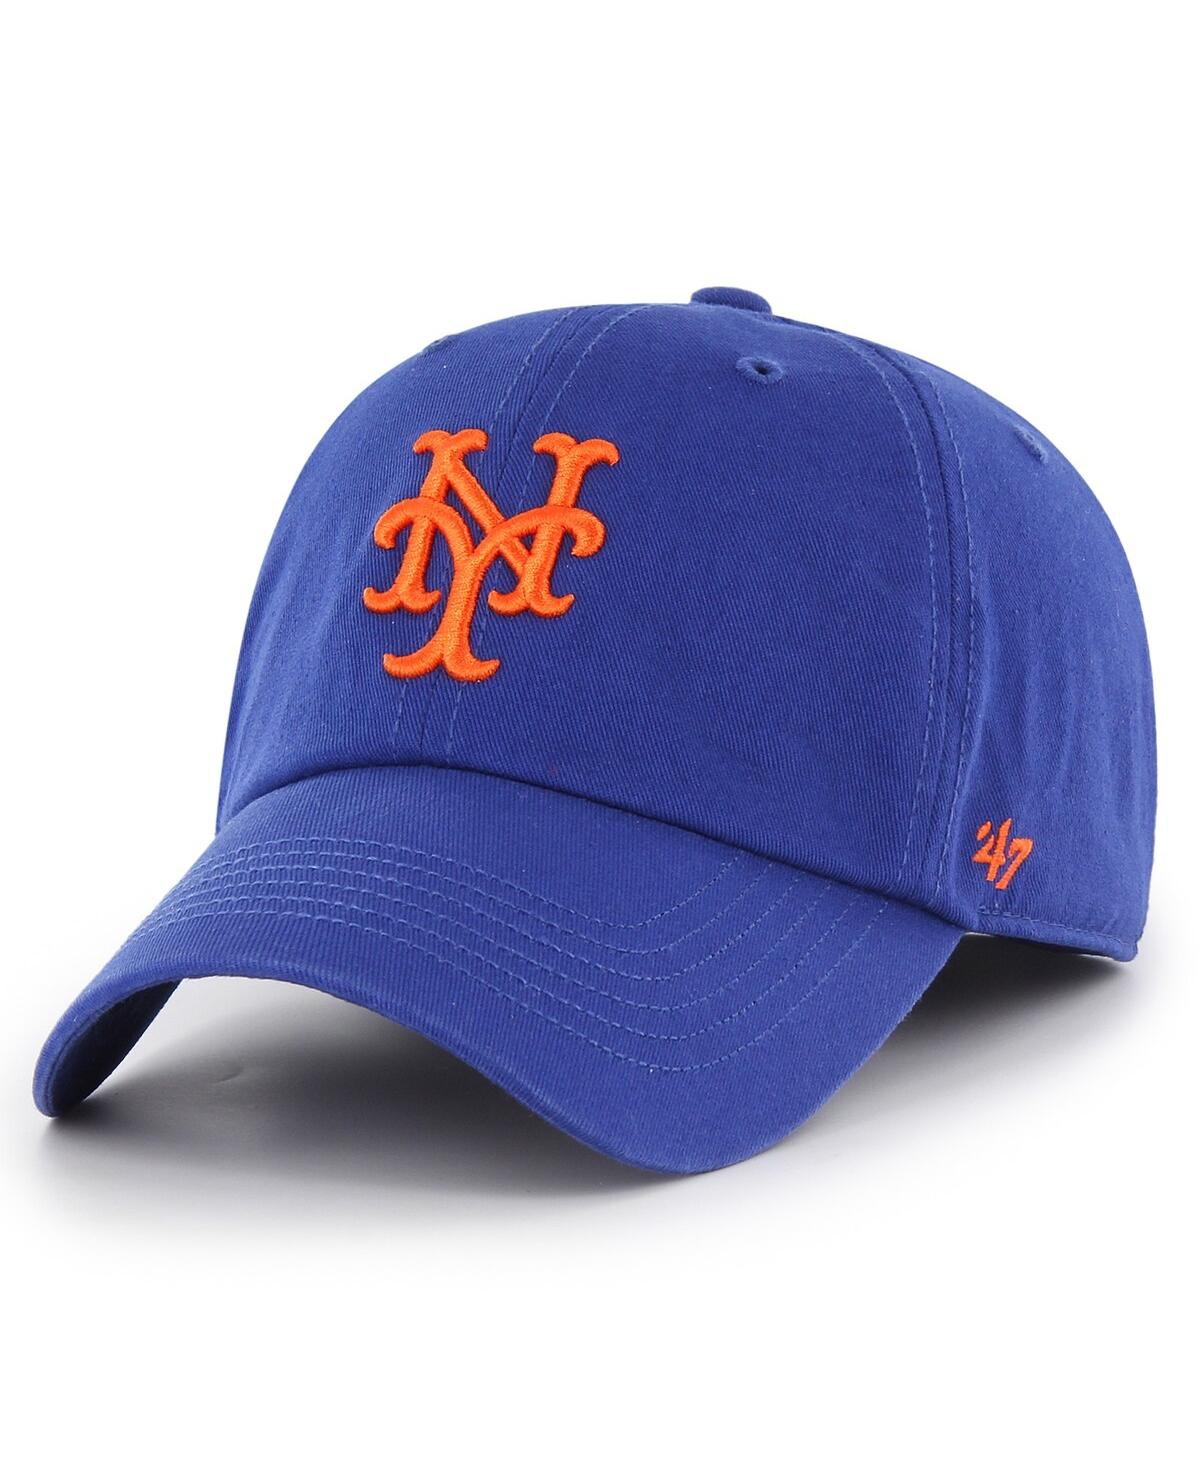 Men's '47 Brand Royal New York Mets Cooperstown Collection Franchise Fitted Hat - Royal